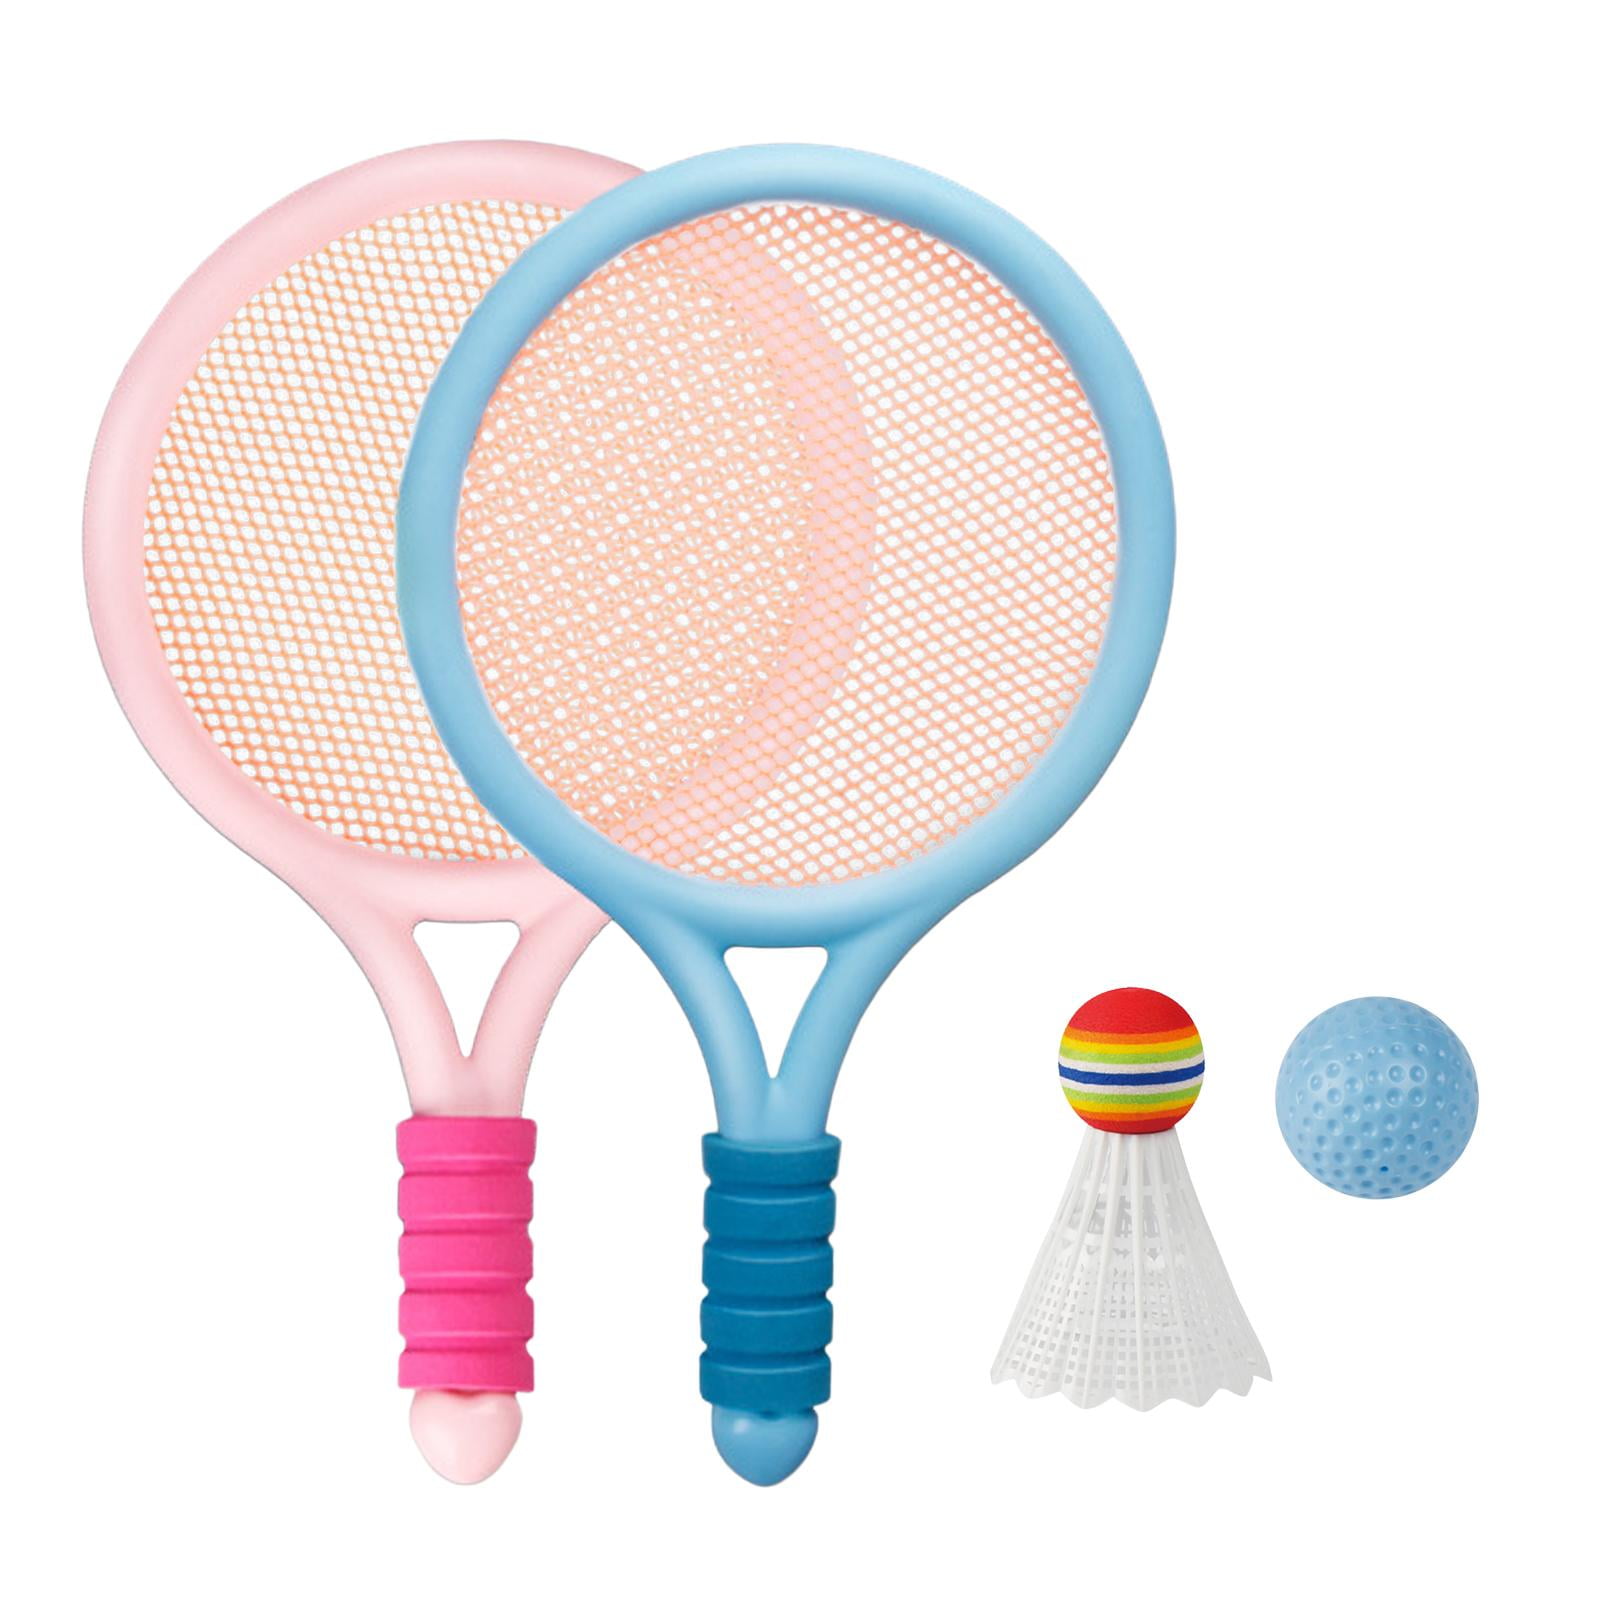 Badminton Tennis Racket with Tennis Ball And Badminton Shuttlecock for Training Beginner Players , Blue Pink